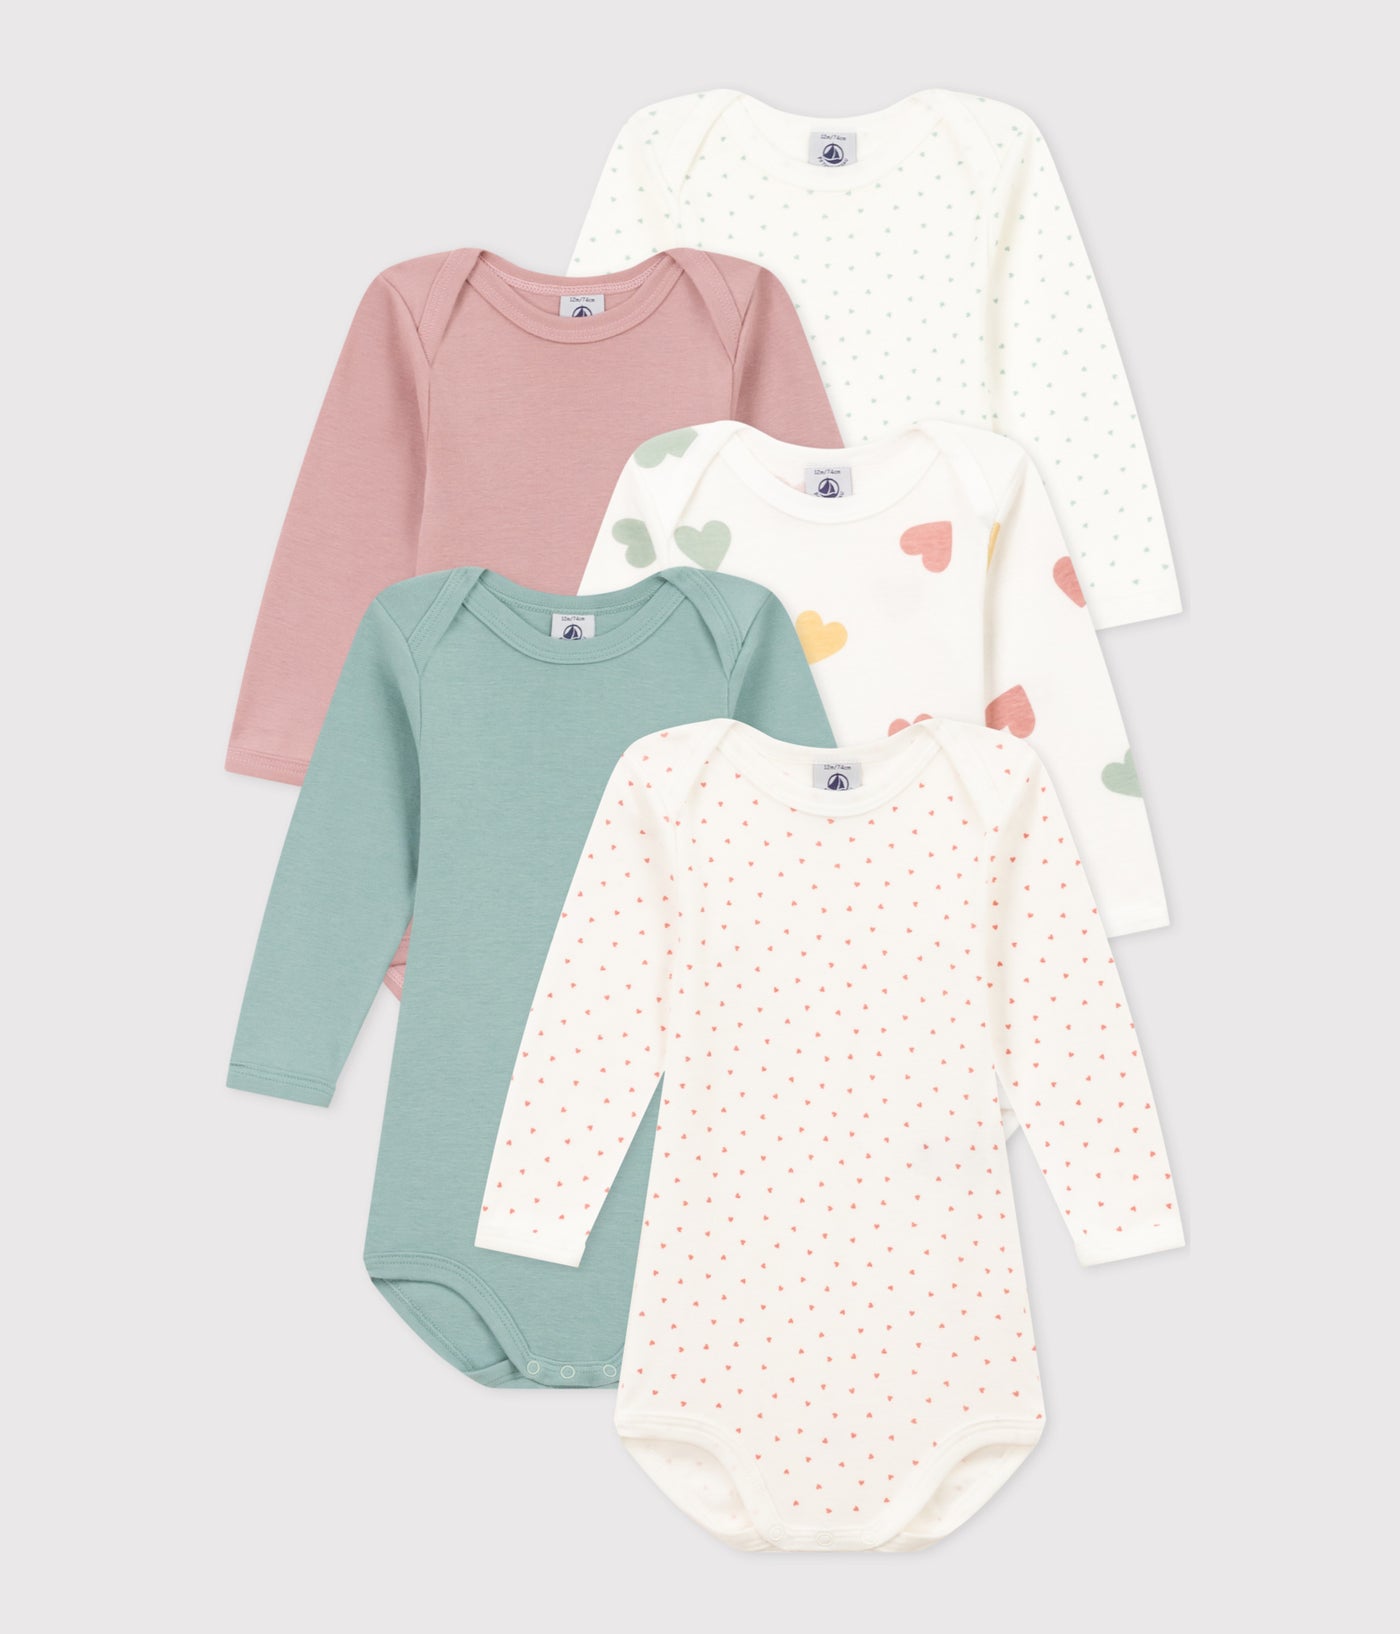 BABIES' HEART PATTERNED LONG-SLEEVED COTTON BODYSUITS - 5-PACK